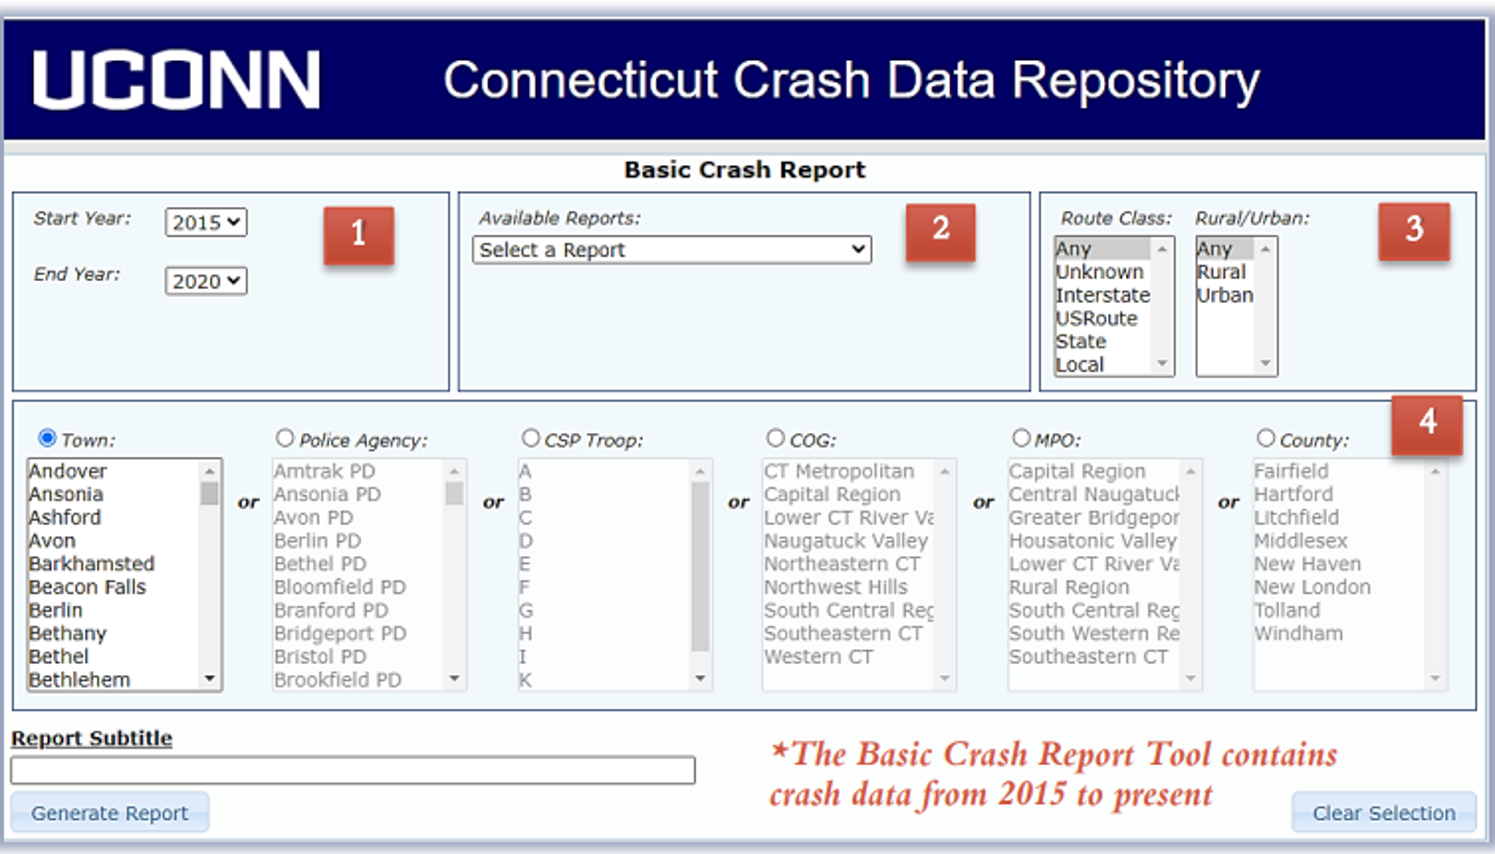 screenshot of a Basic Crash Report search criteria displaying on UCONN’s Connecticut Crash Data Repository: (1) Start and End years, (2) Select an available report, (3) Route Class and Rural, Urban, or both, and (4) Town or Police Agency or CSP Troop or COG or MPO or County